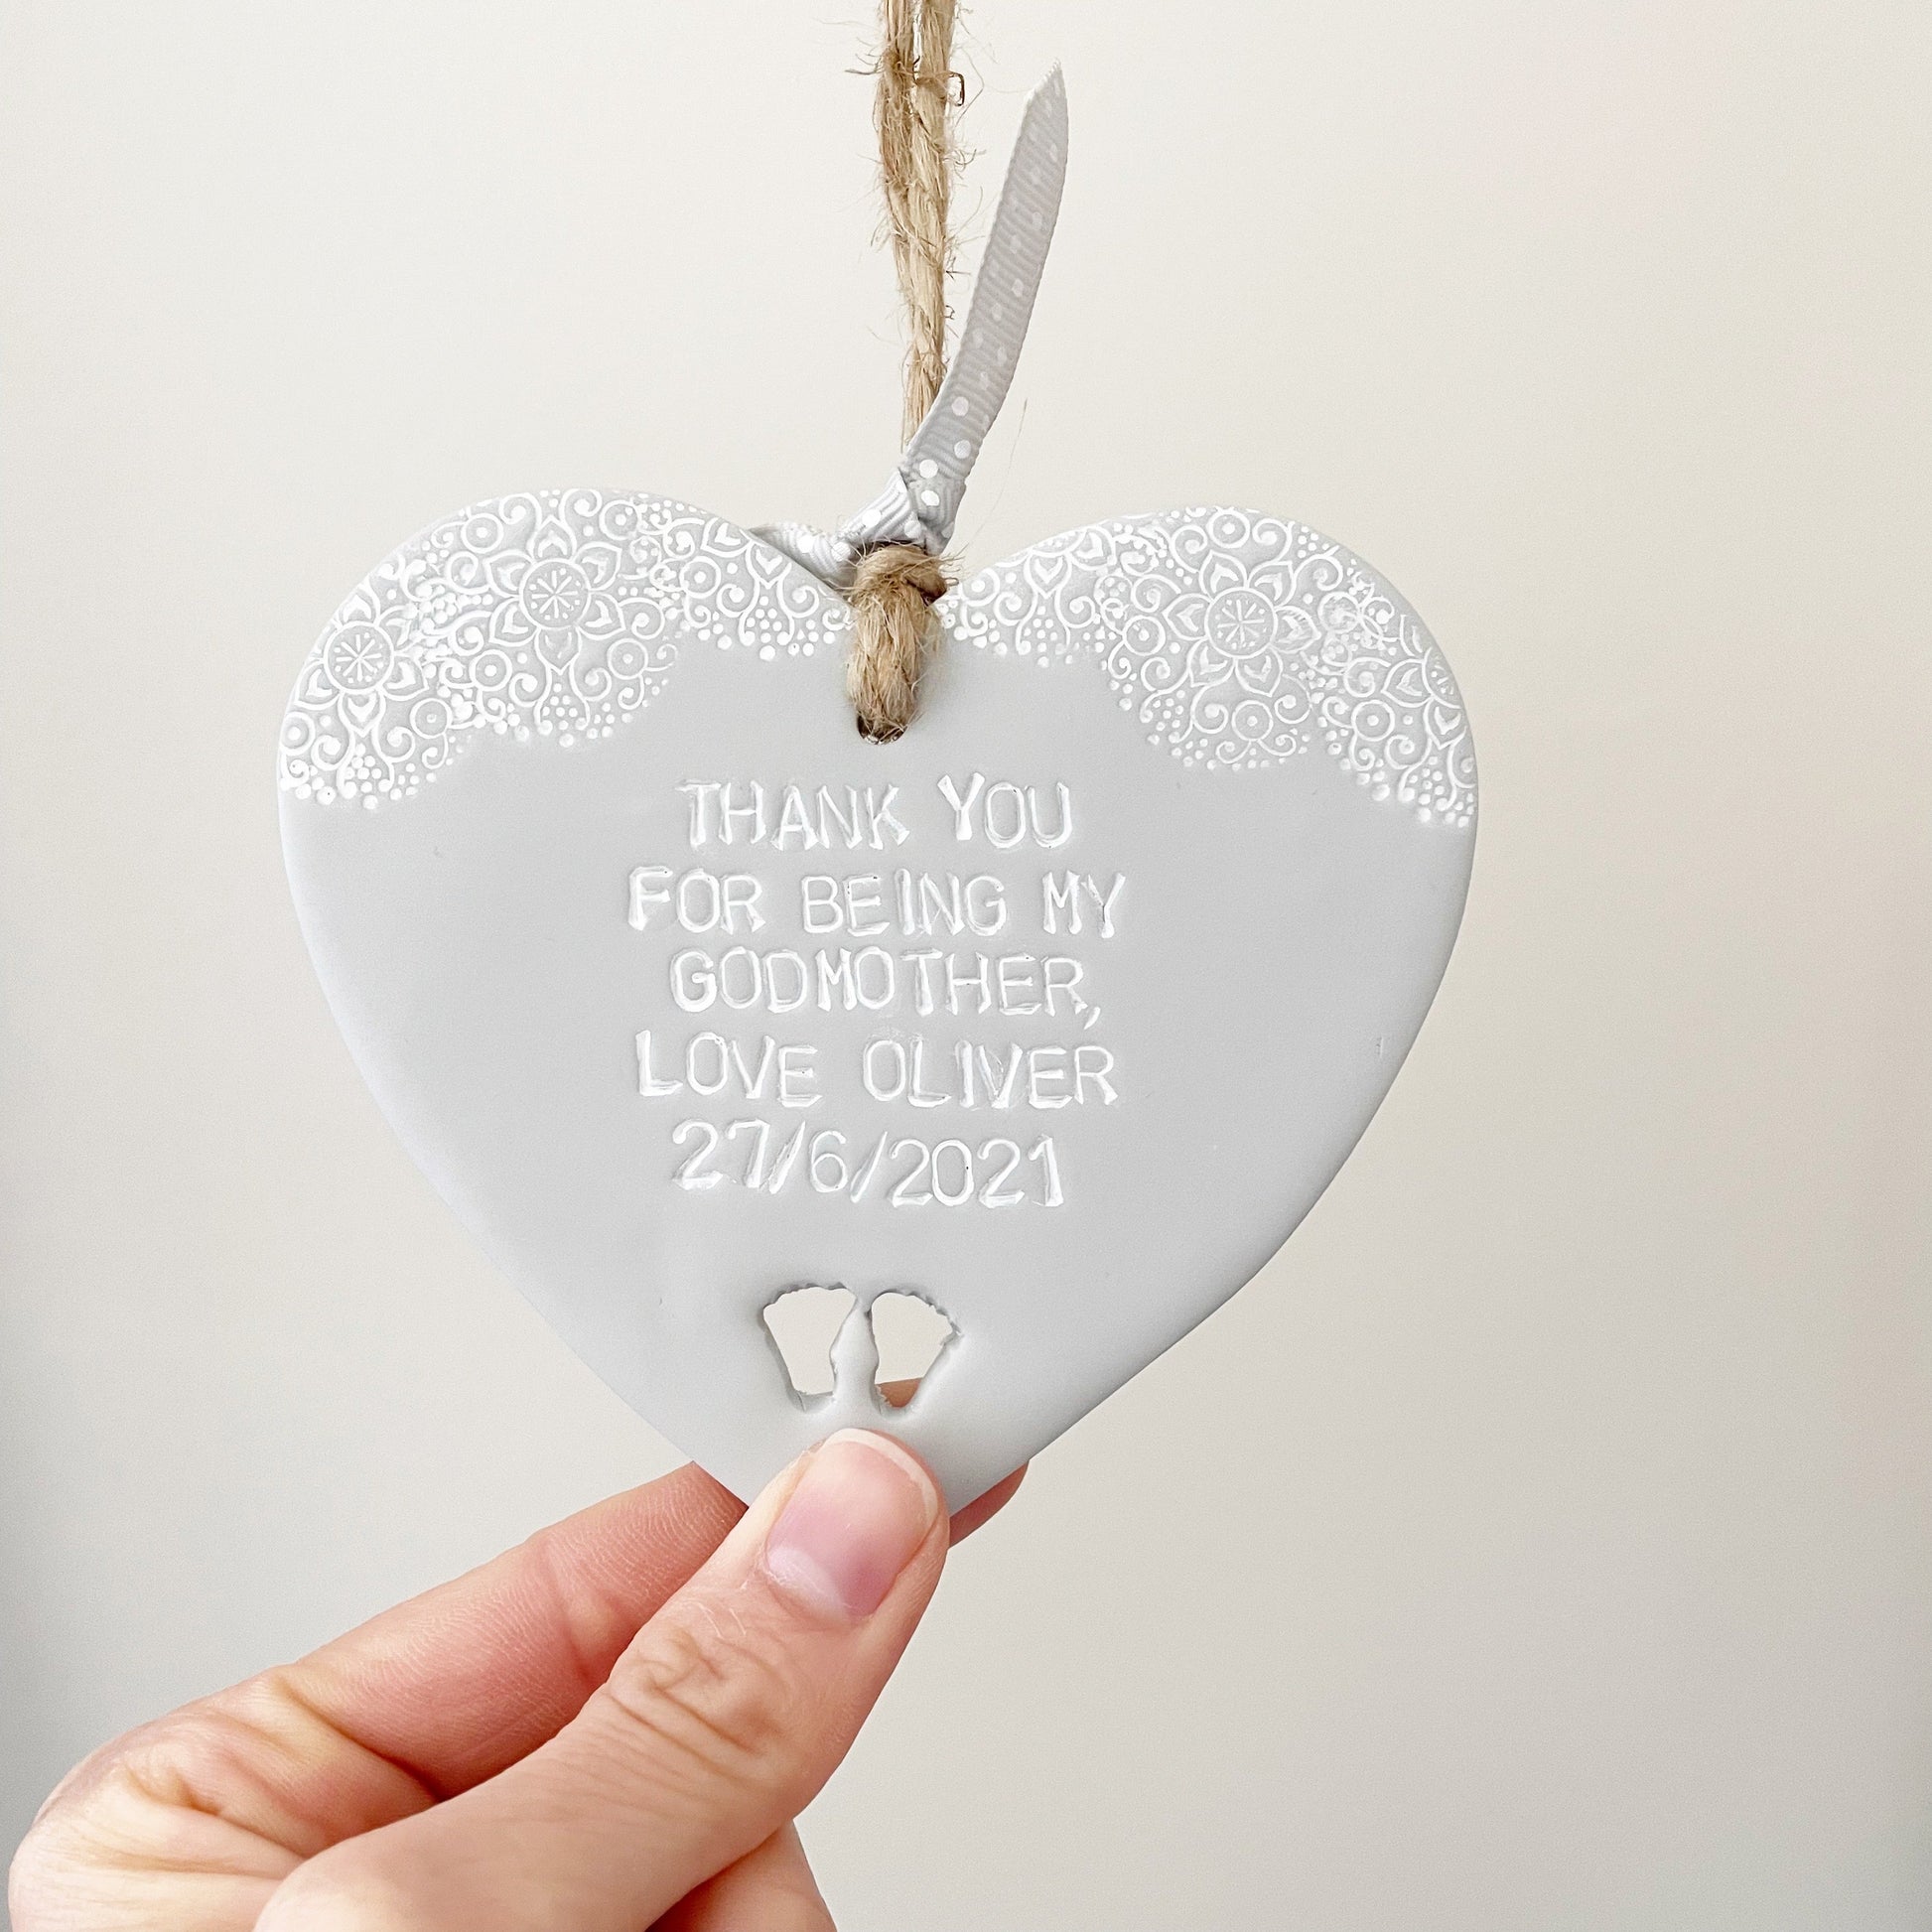 Personalised Godparent gift, grey clay hanging heart with baby feet cut out of the bottom and white lace edge at the top of the heart, the heart is personalised with THANK YOU FOR BEING MY GODMOTHER, LOVE OLIVER 27/6/2021